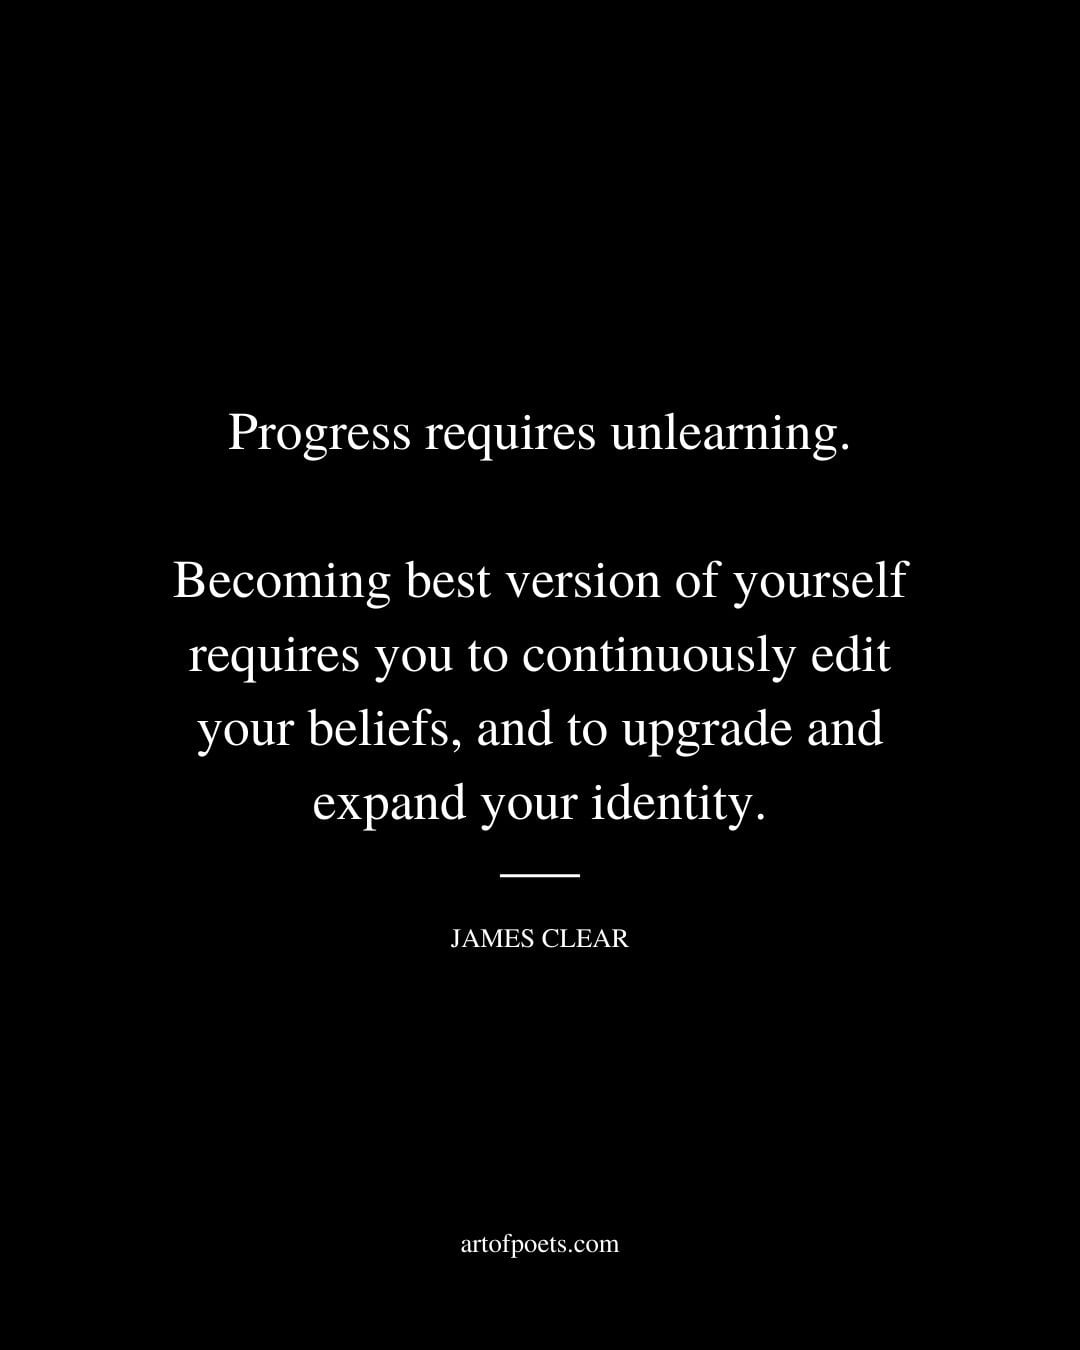 Progress requires unlearning. Becoming best version of yourself requires you to continuously edit your beliefs and to upgrade and expand your identity